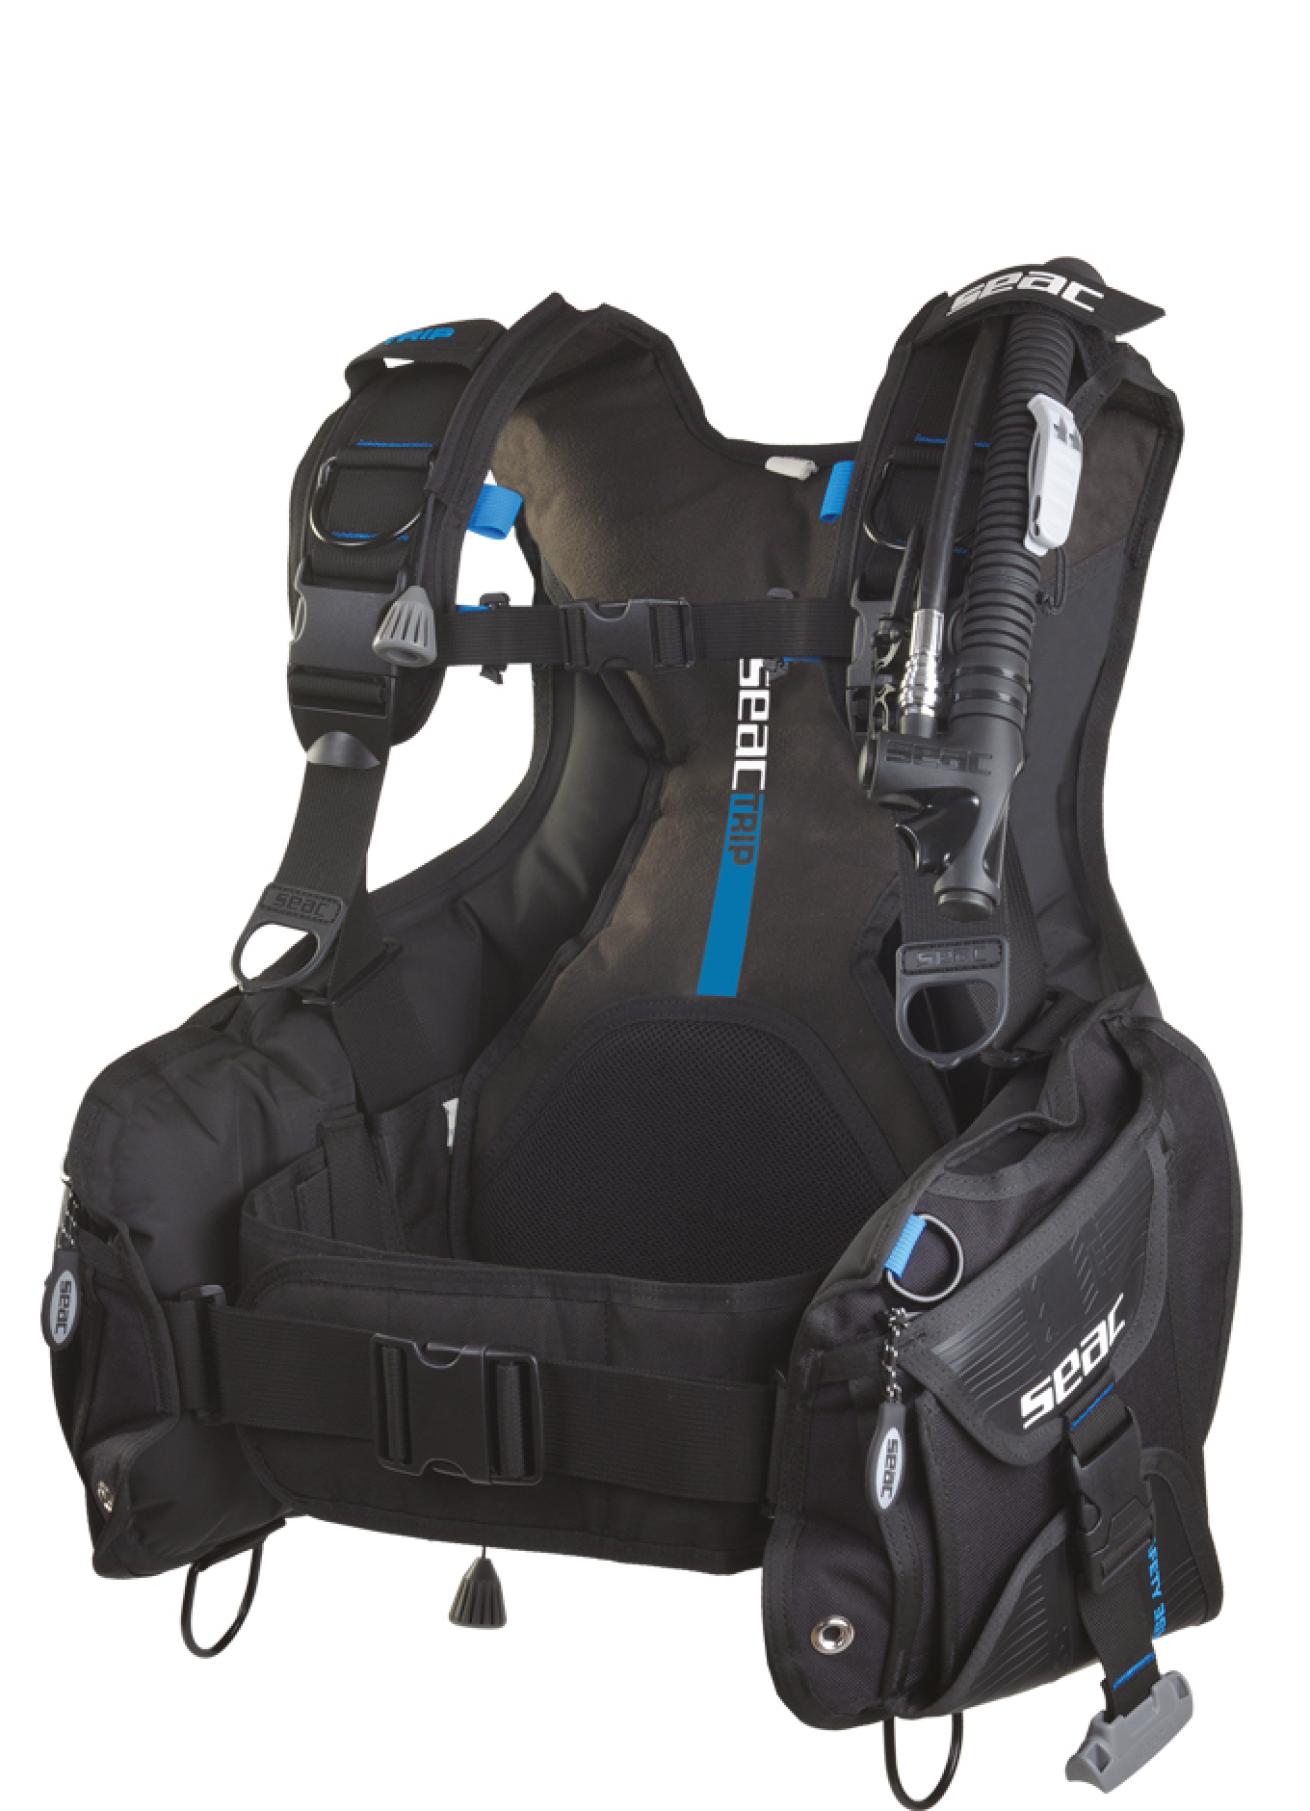 The New SEAC Trip Foldable Travel BCD provides the perfect balance between freedom of movement, fit, comfort and functionality thanks to a list of new features